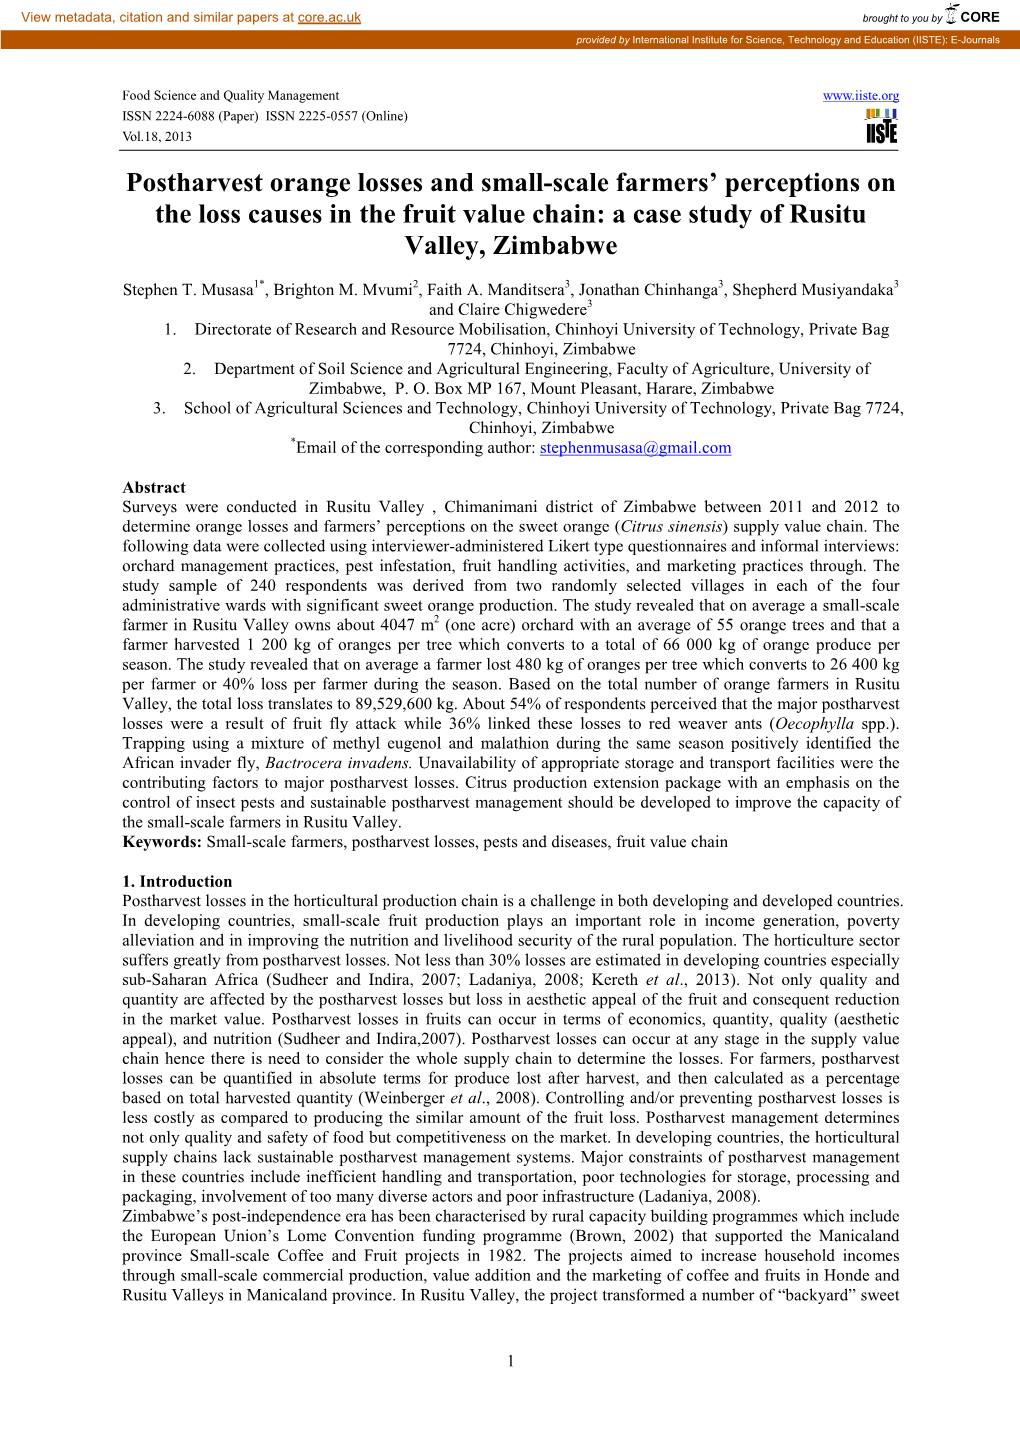 Postharvest Orange Losses and Small-Scale Farmers’ Perceptions on the Loss Causes in the Fruit Value Chain: a Case Study of Rusitu Valley, Zimbabwe